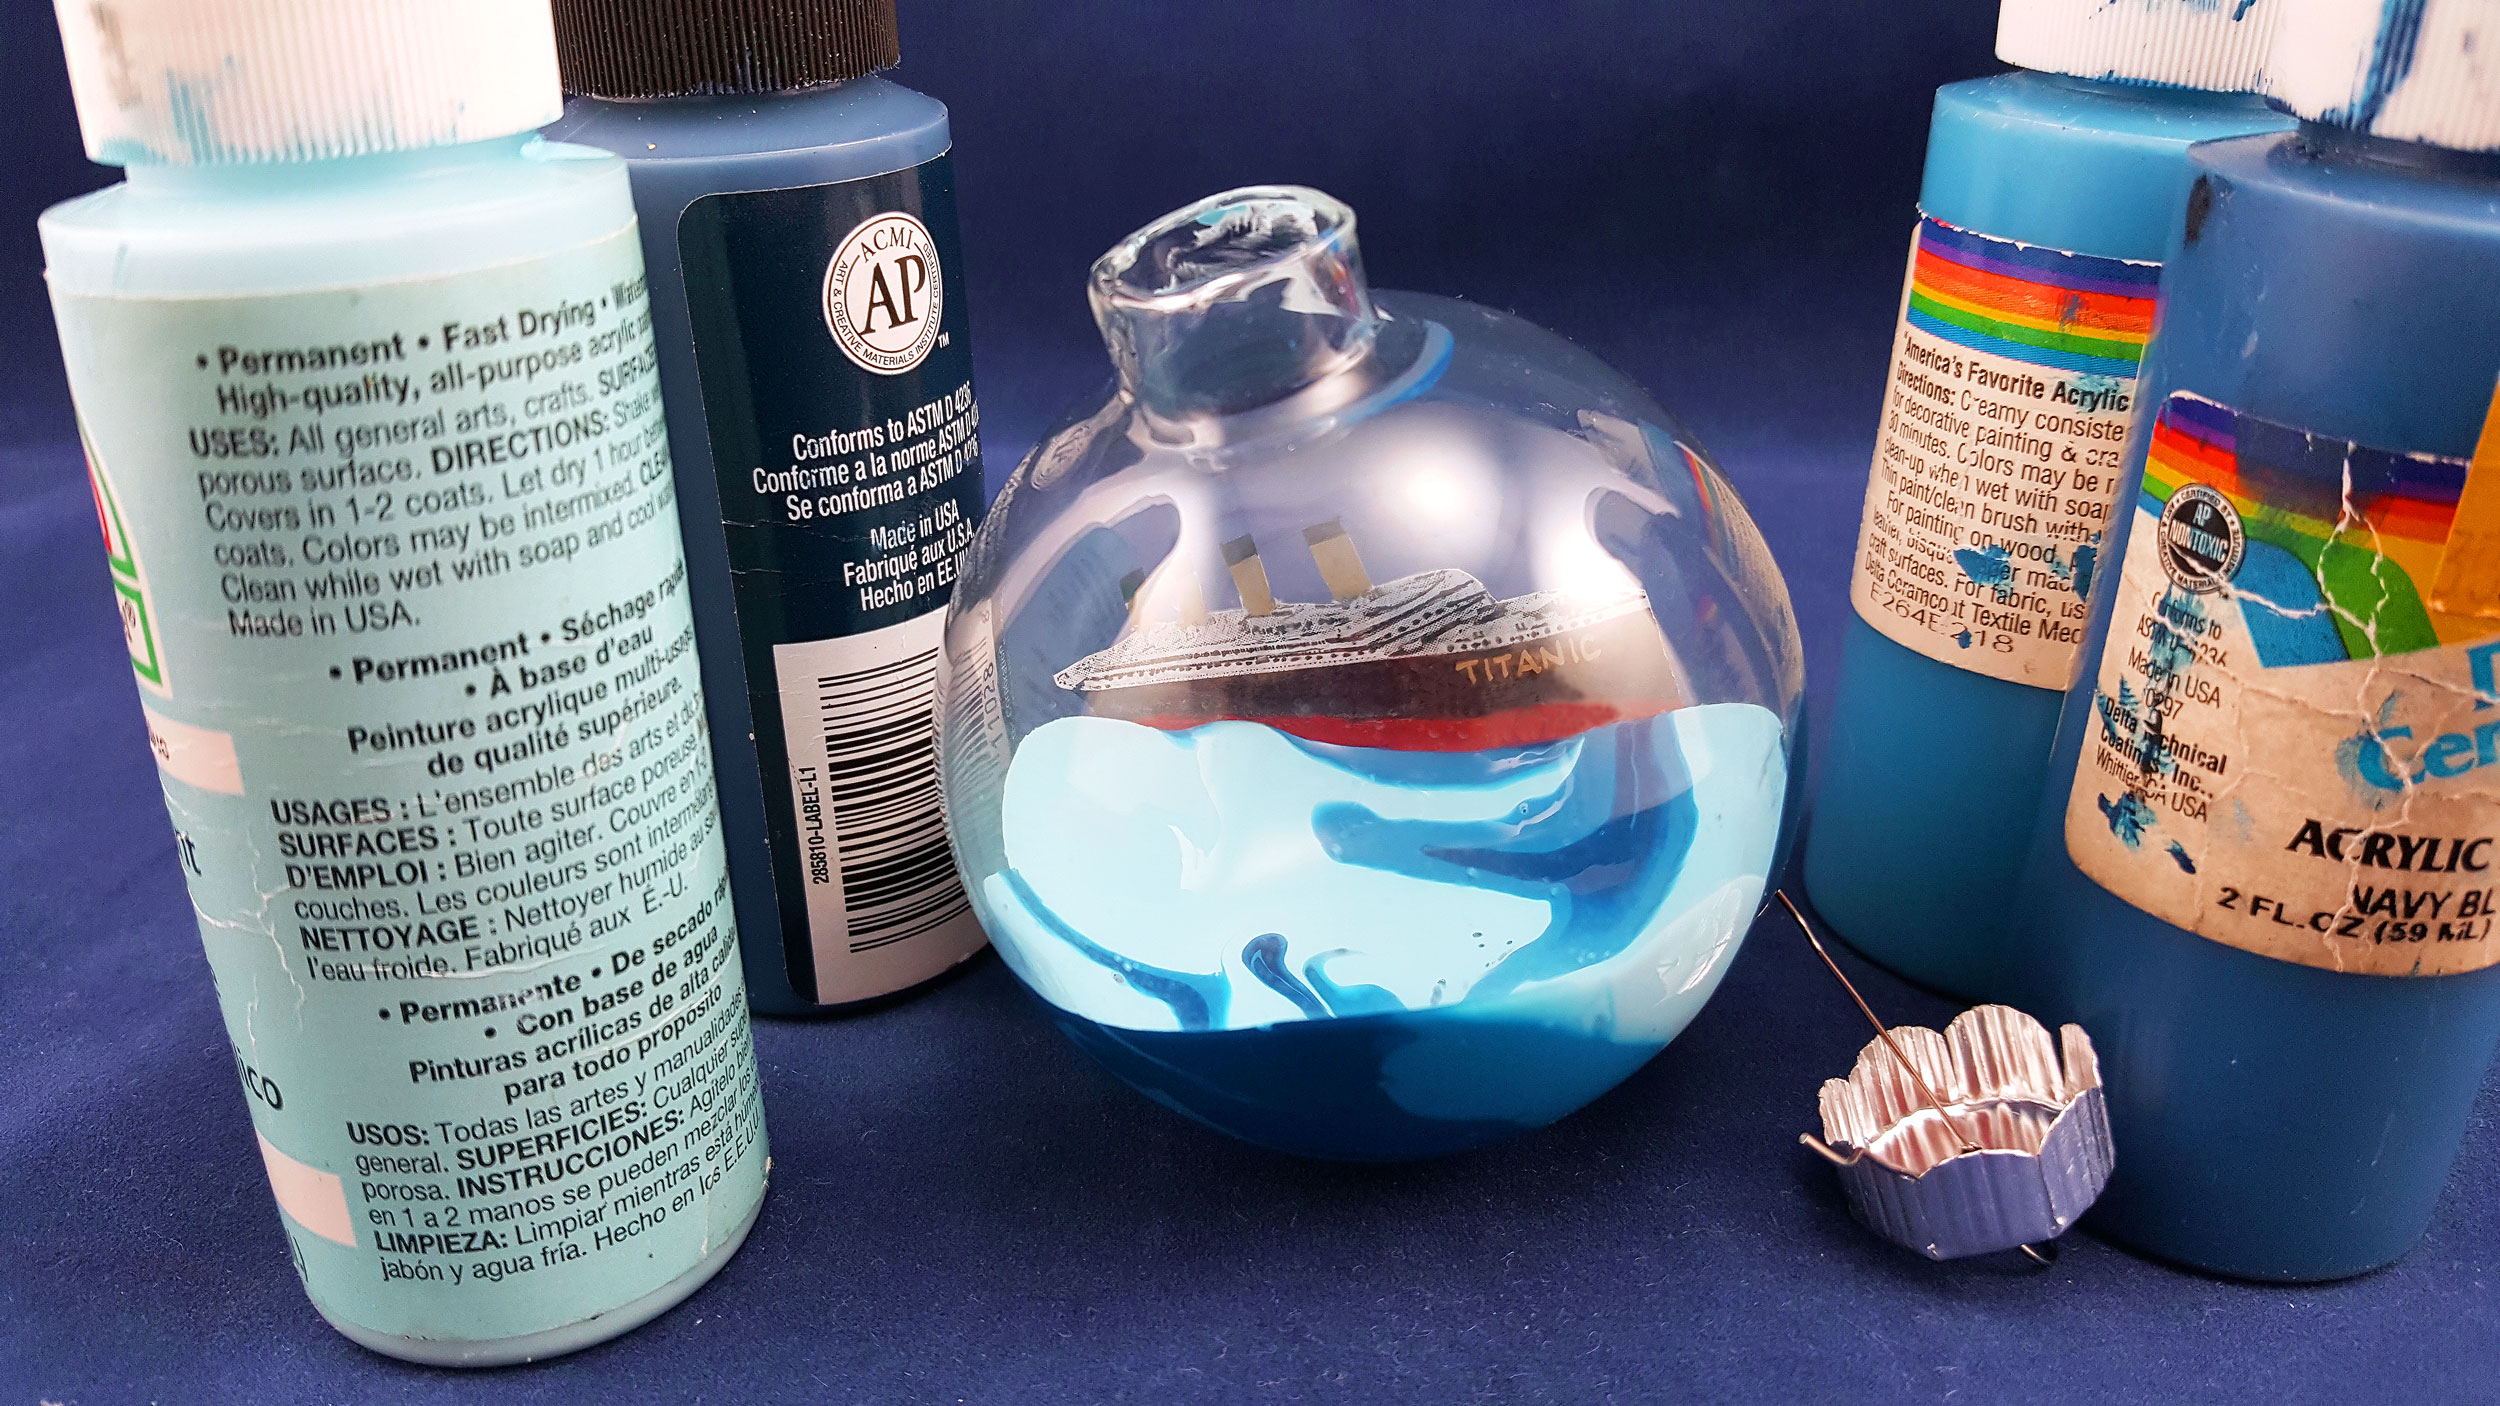 For Step 3, mix the blue paints together and fill the glass ball ornament. | OrnamentShop.com